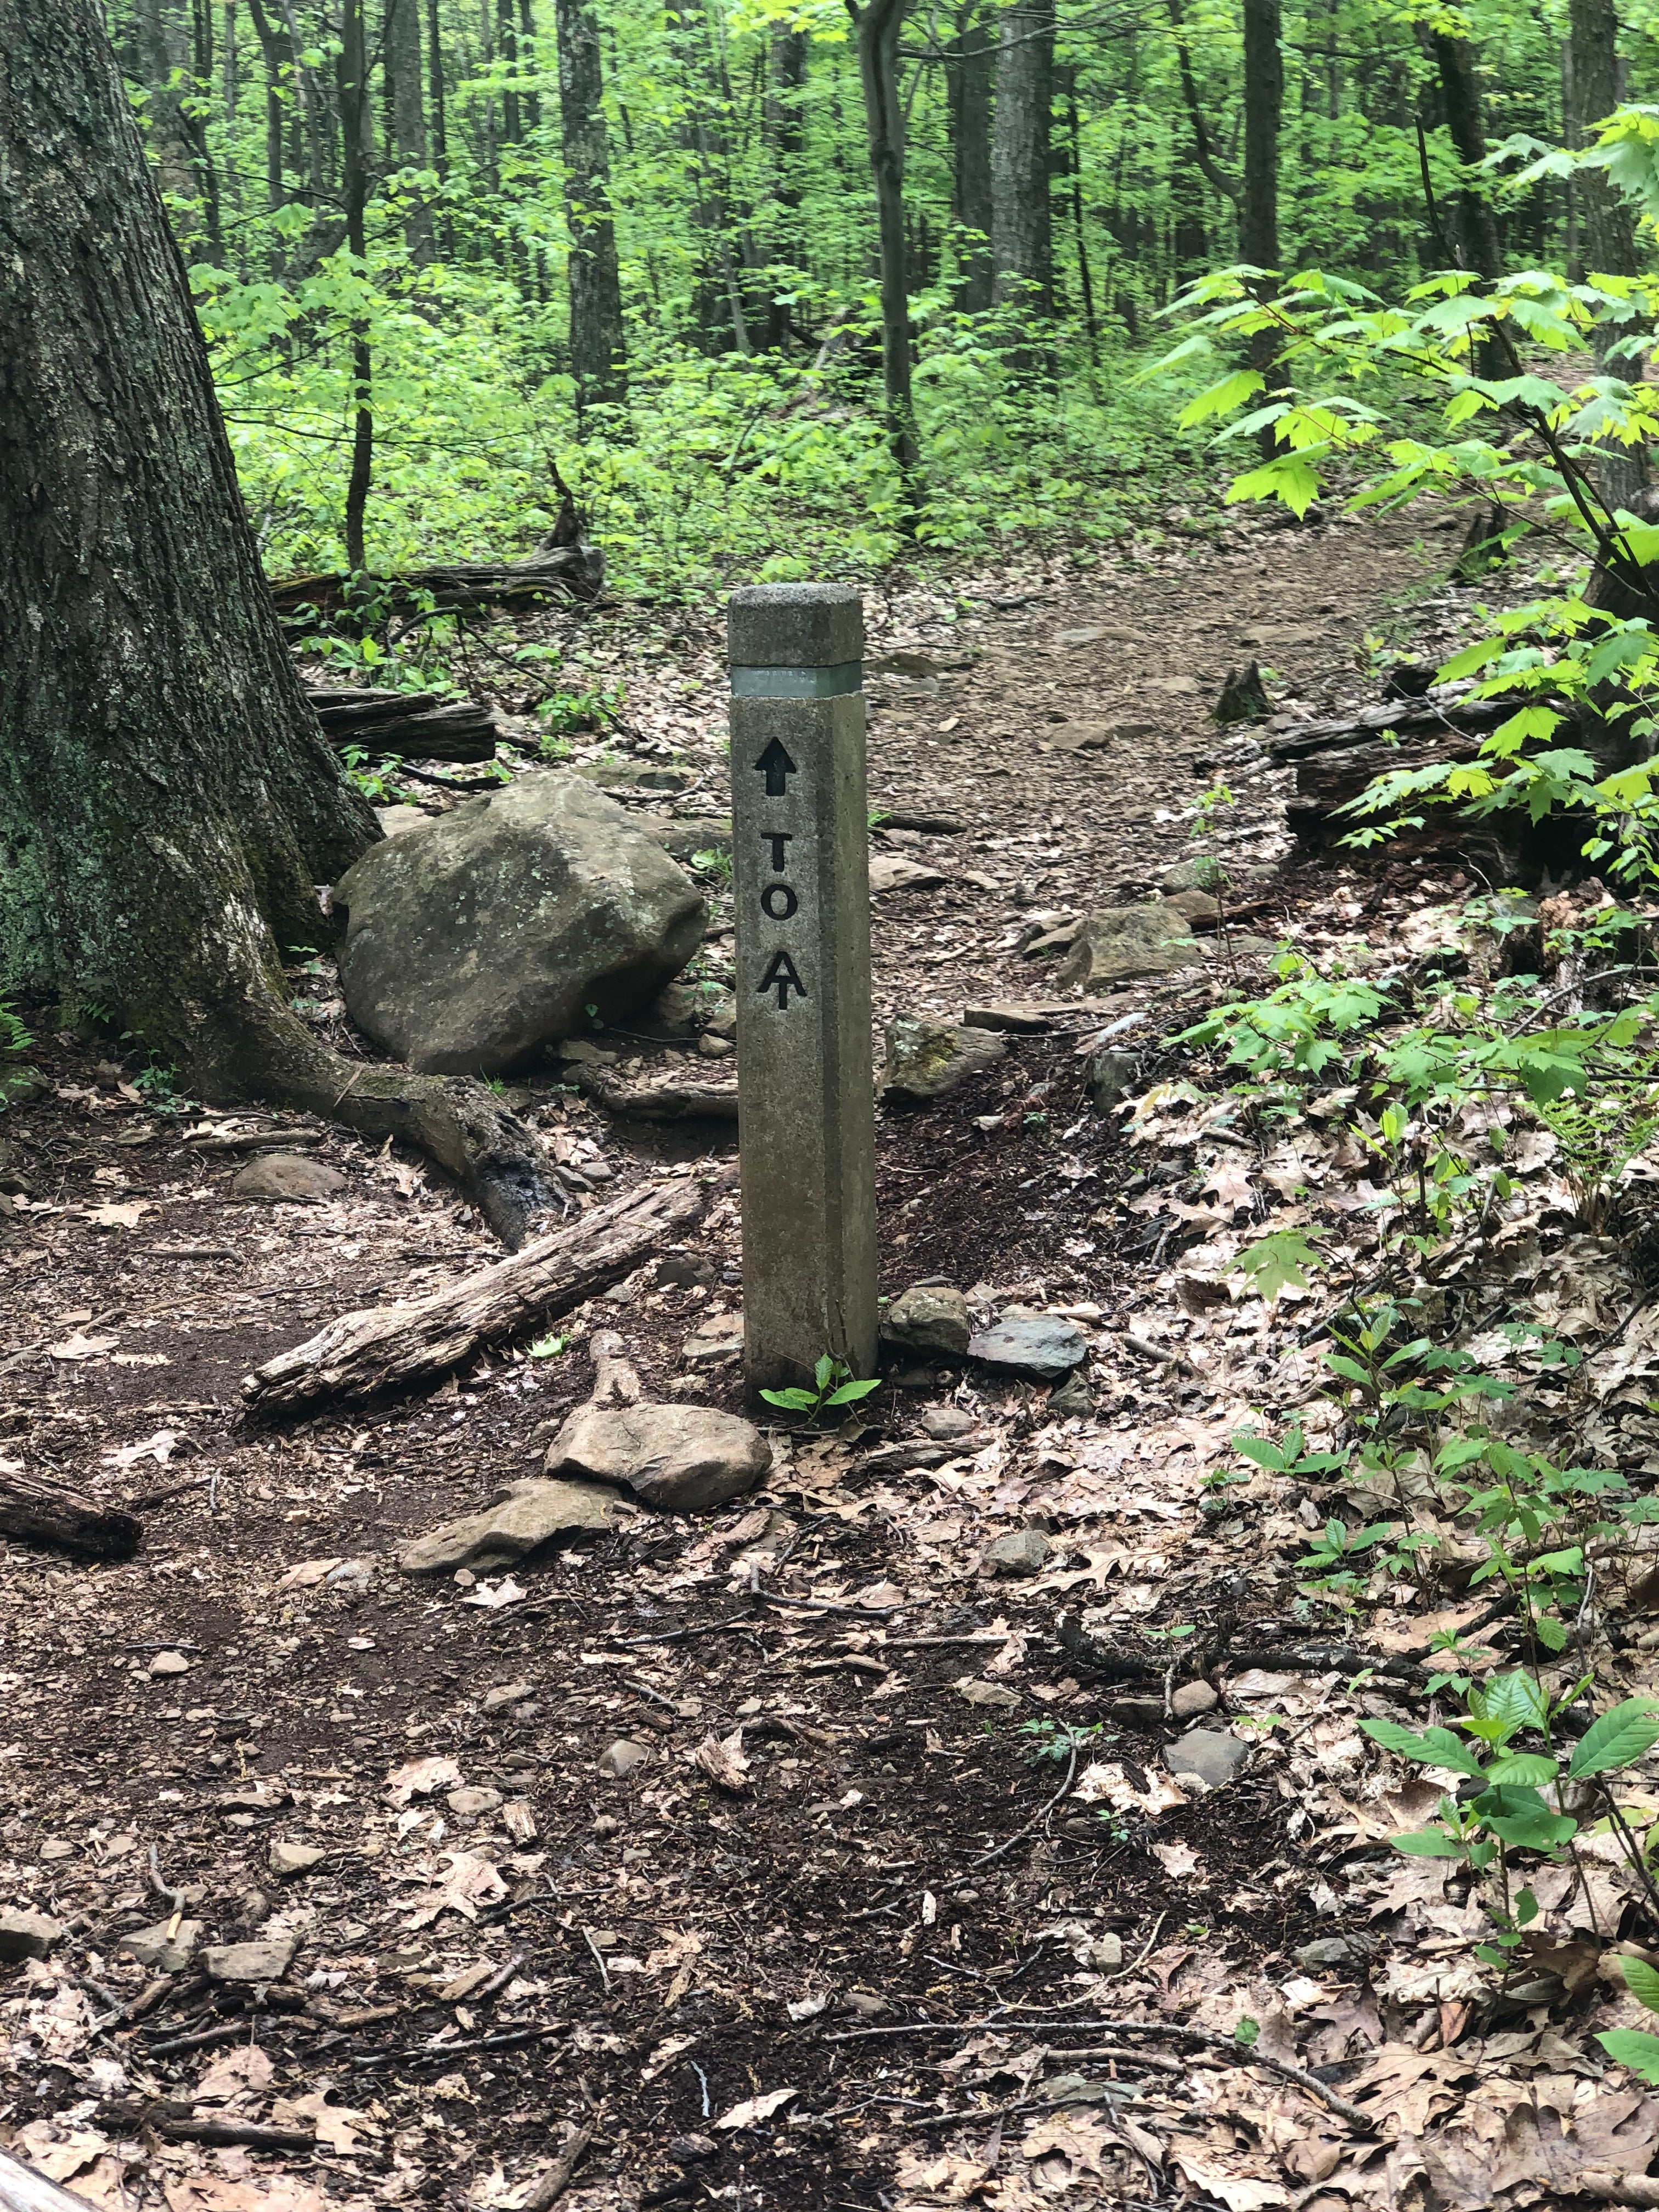 The trailhead at Mathews Arm Campground had trails that connect to the Appalachian Trail.